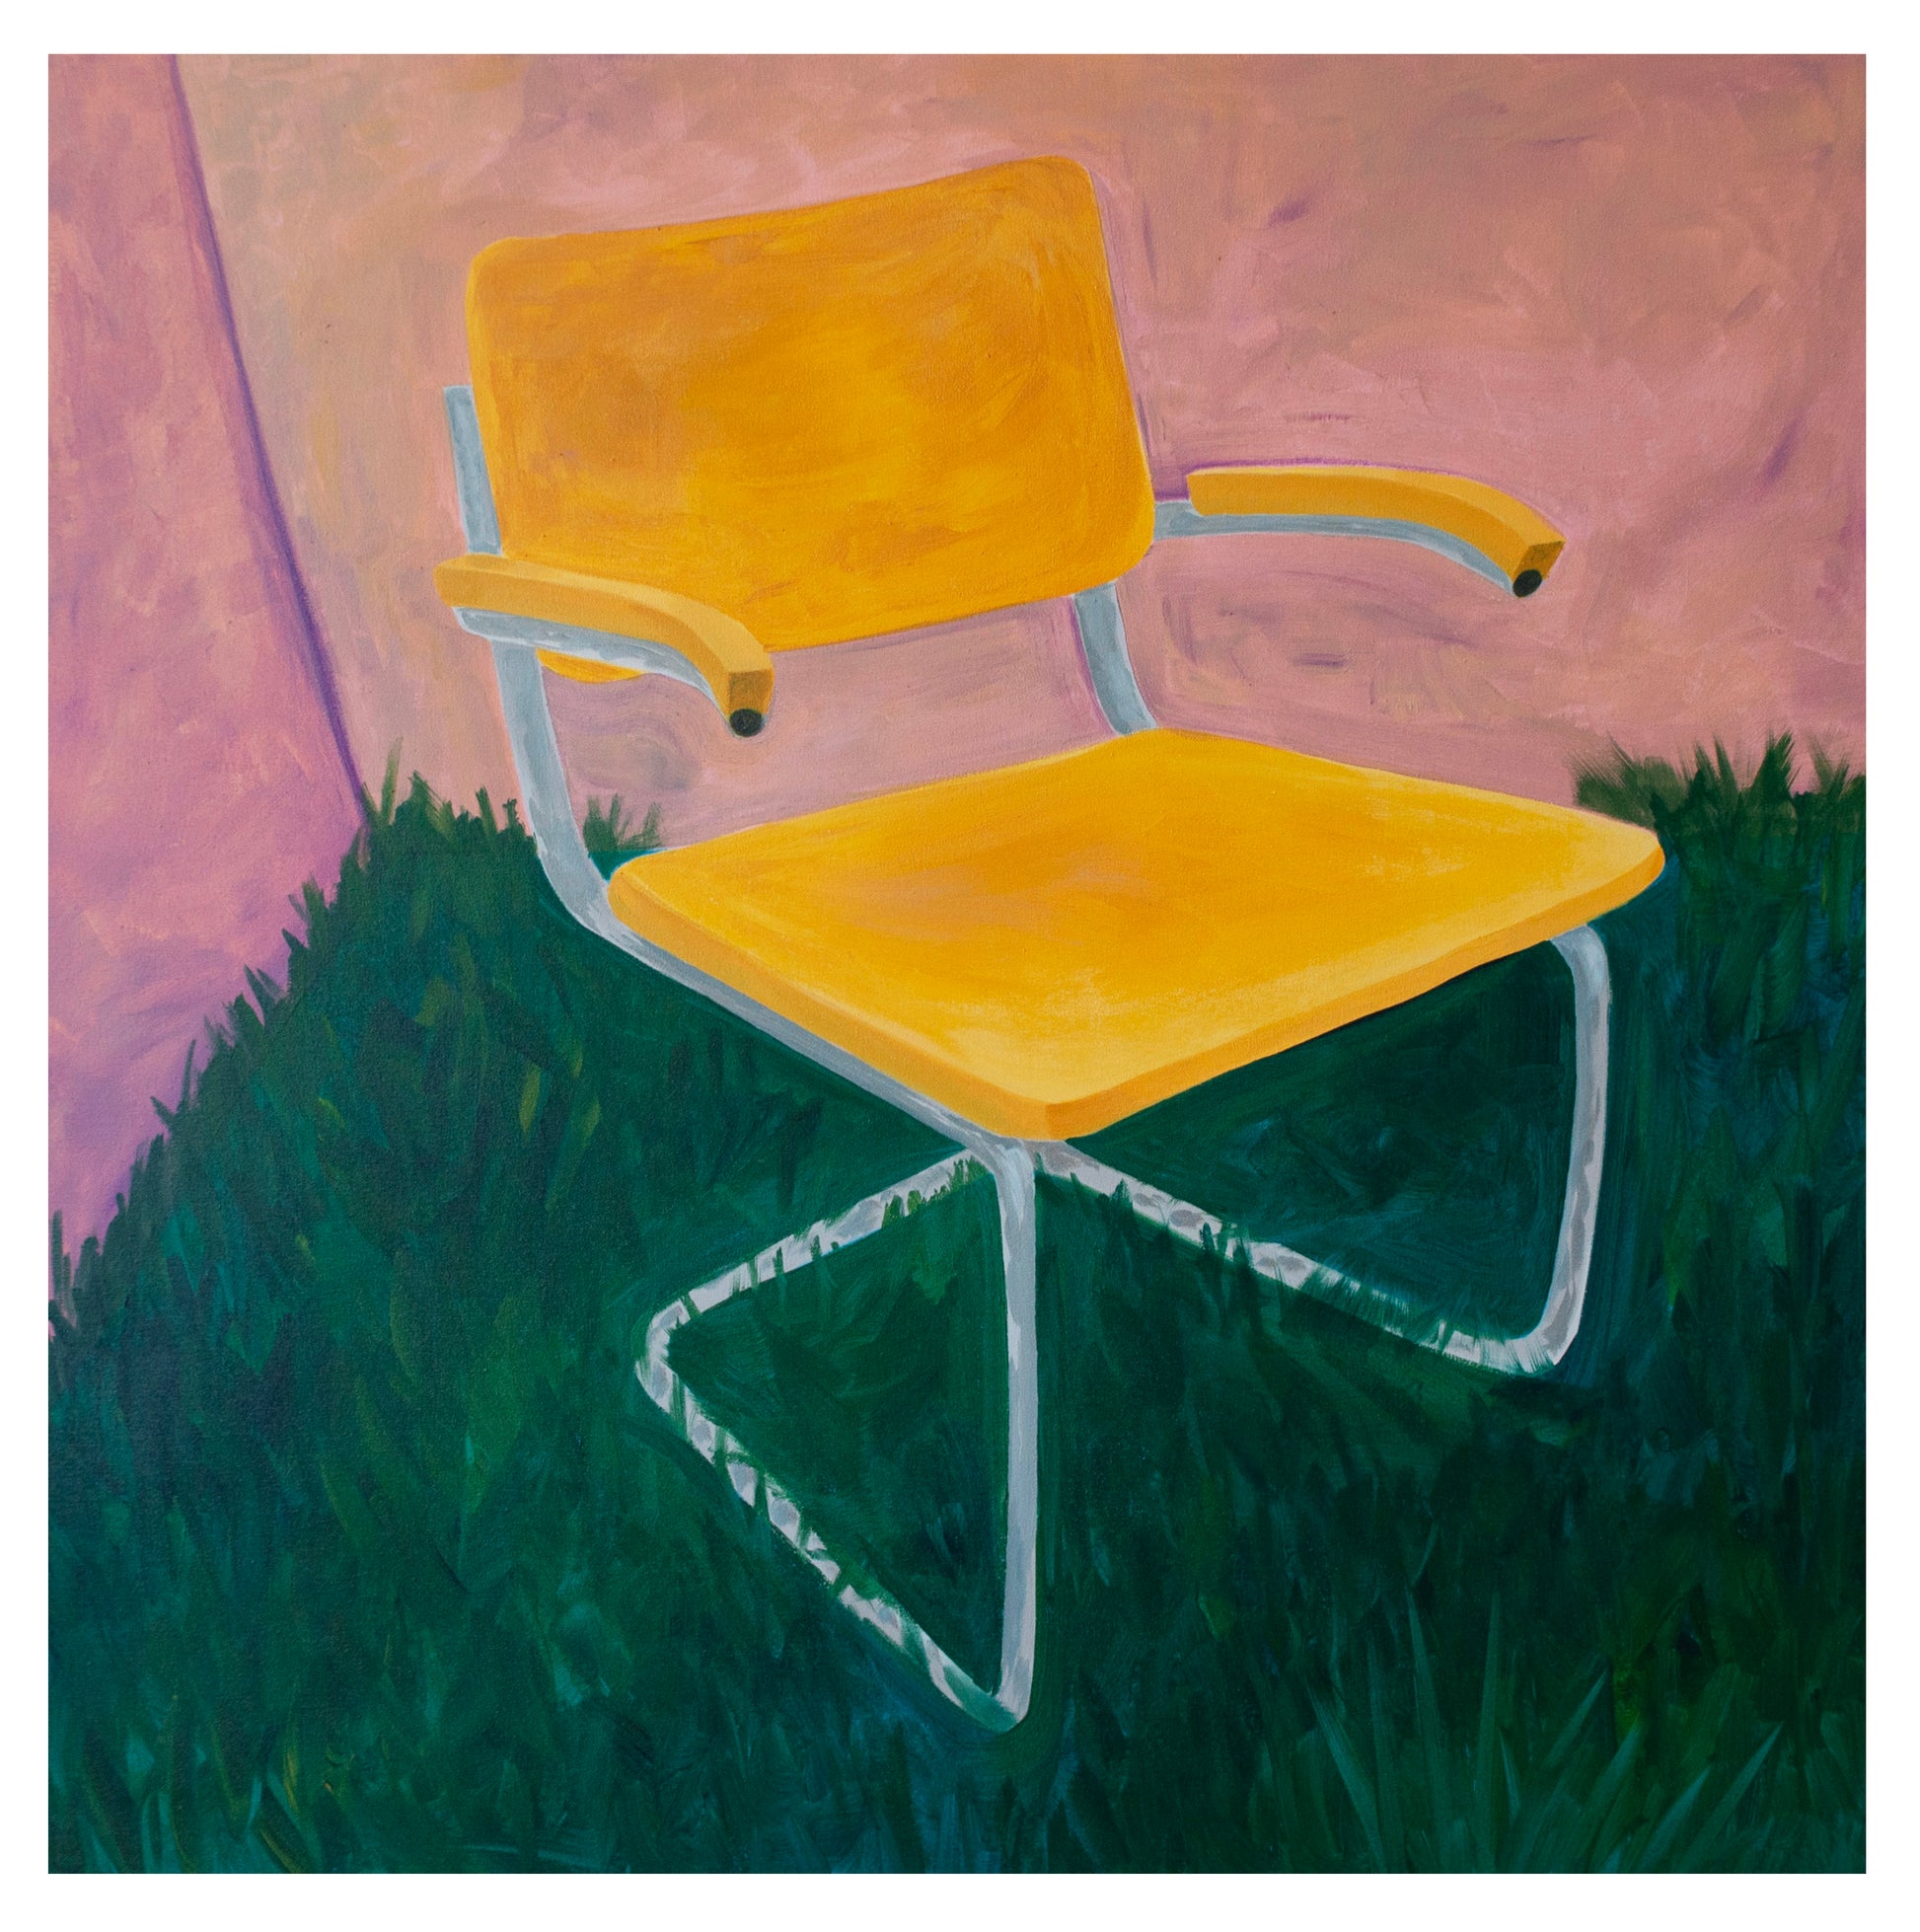 [SOLD] Throne <br><small> 93 x 93 cm, acrylic on canvas, €900 </small>